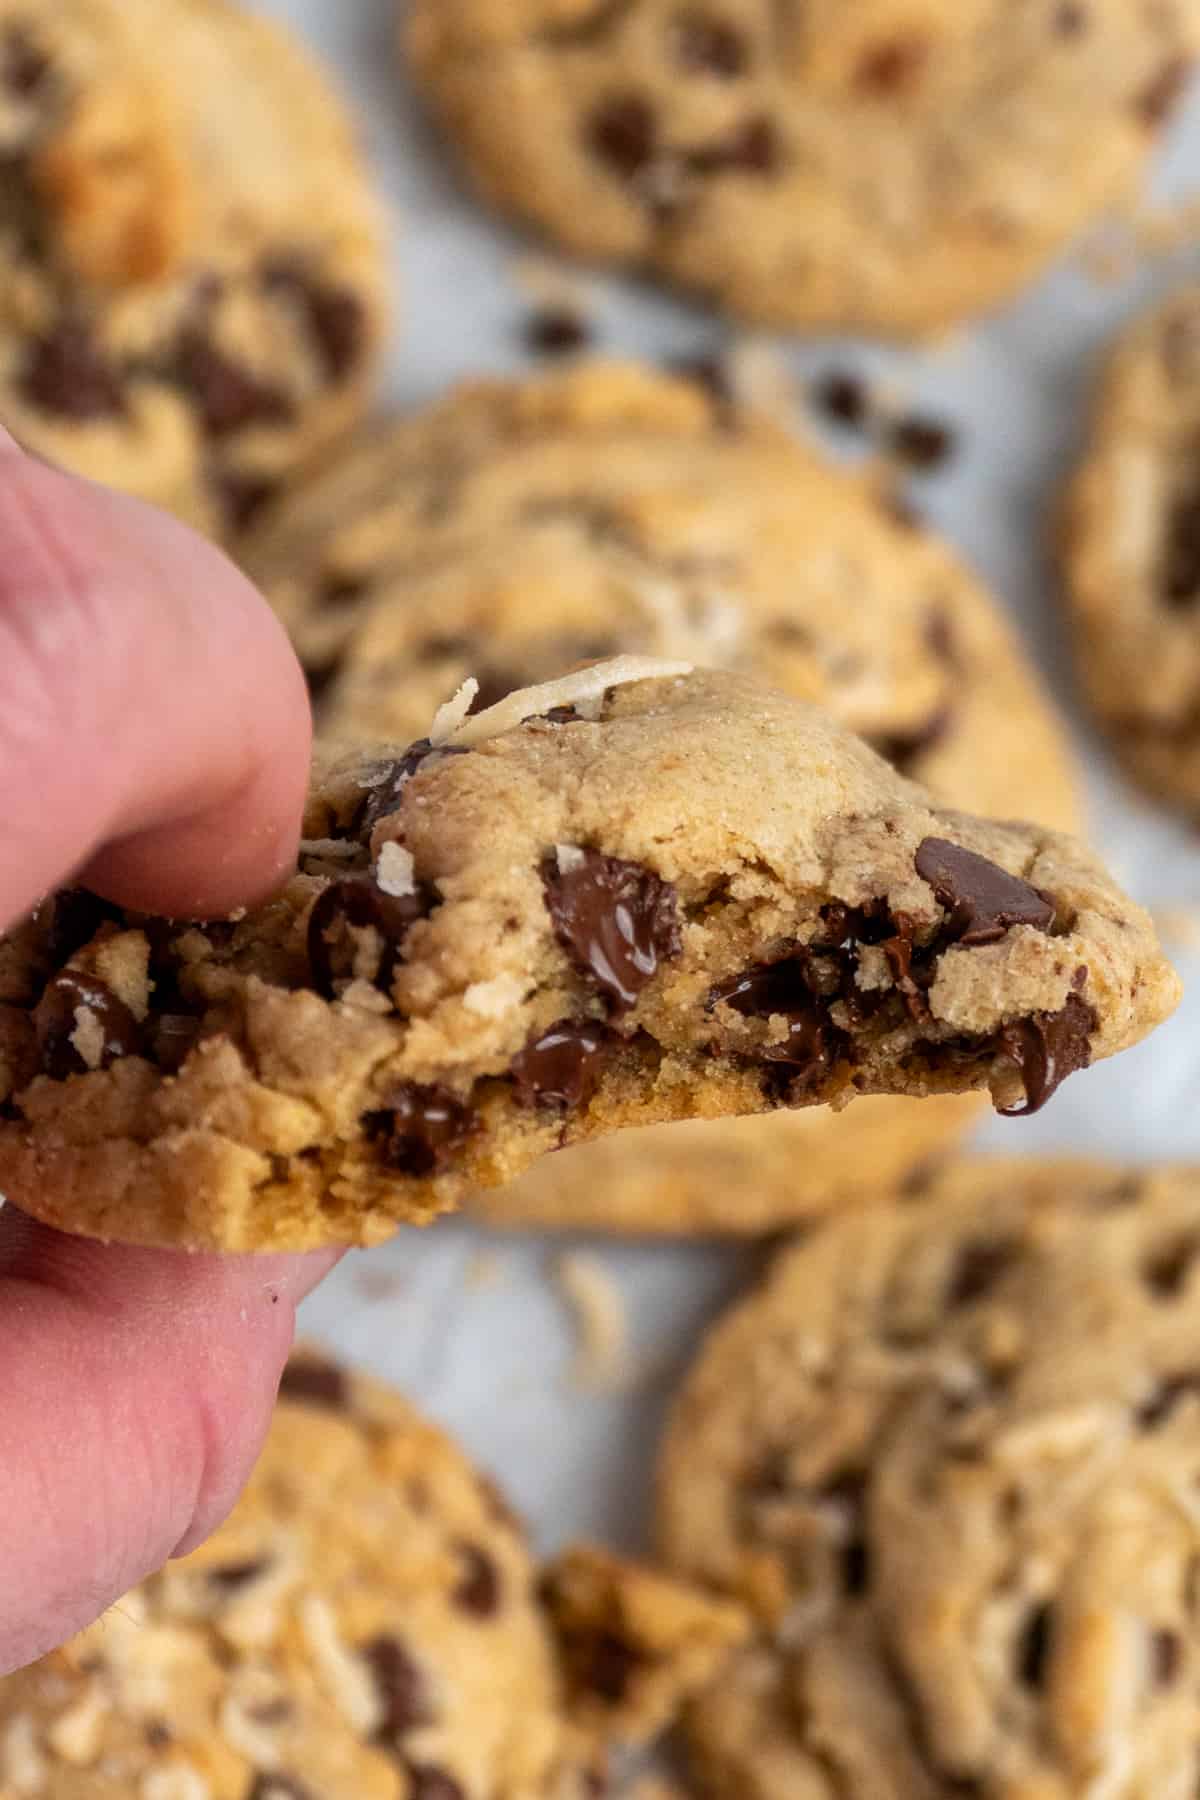 A hand holding a coconut chocolate chip cookie with a bite taken out of it.